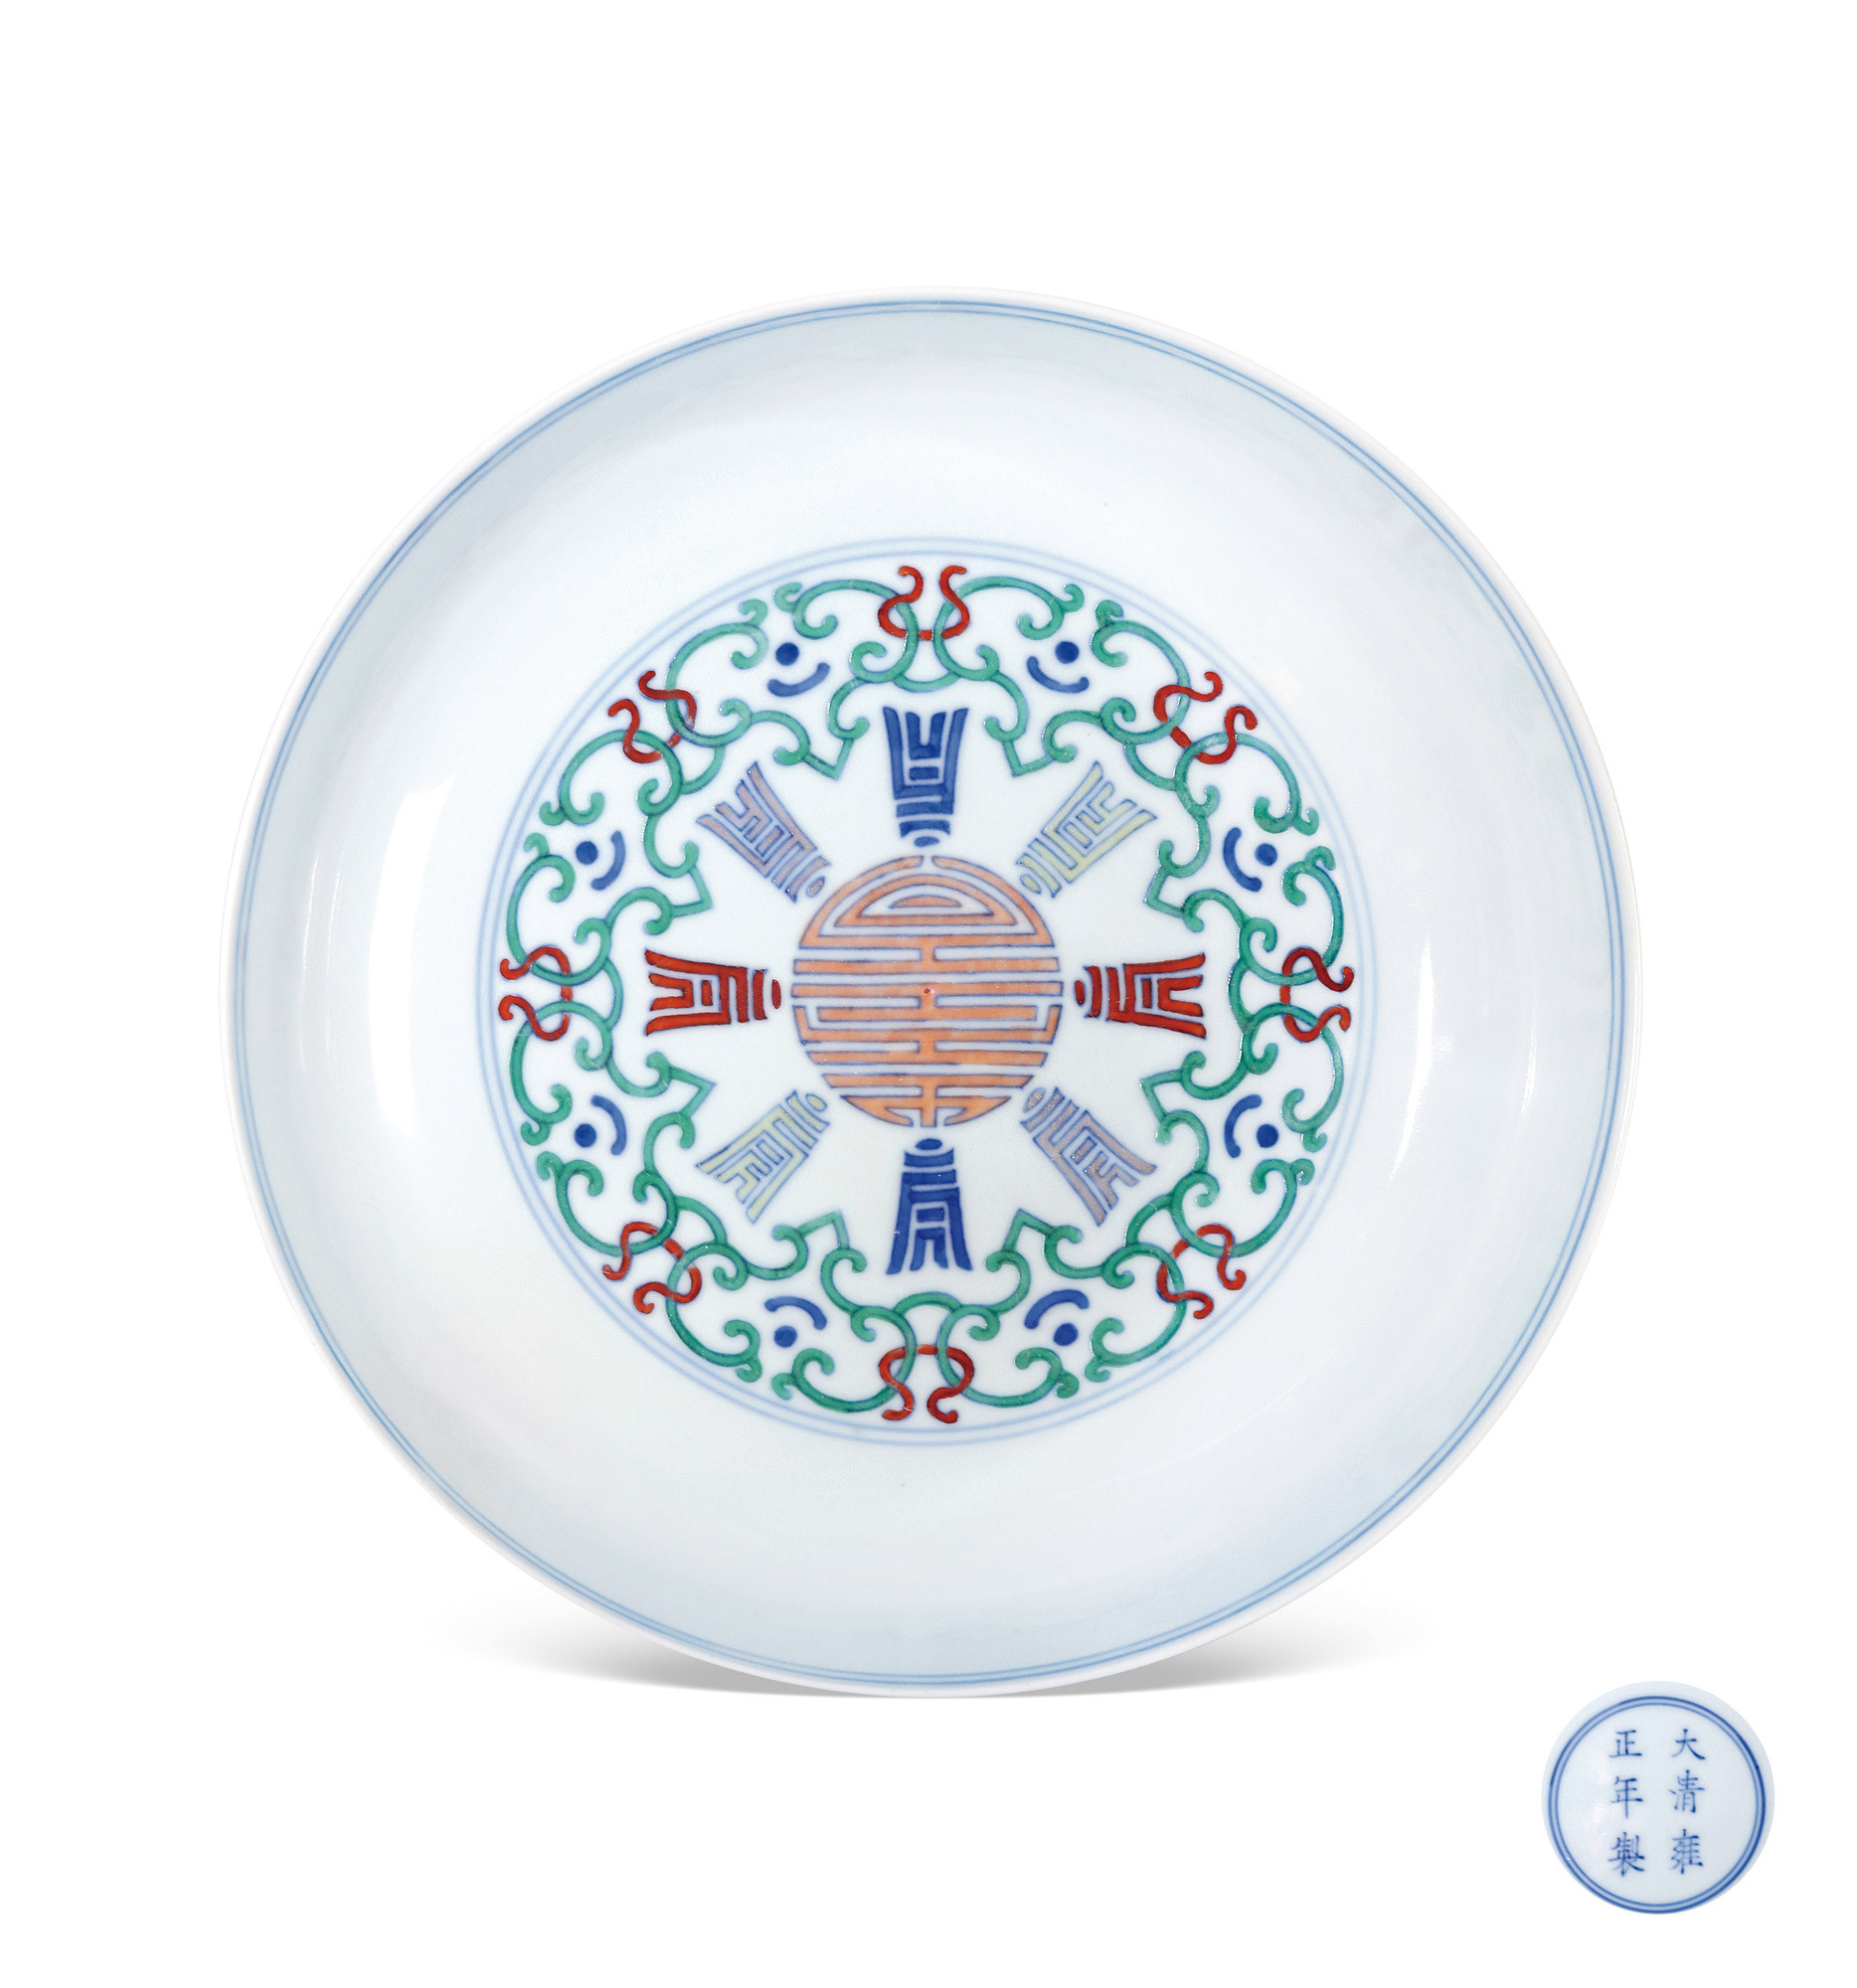 A CONTENDING COLORS PLATE